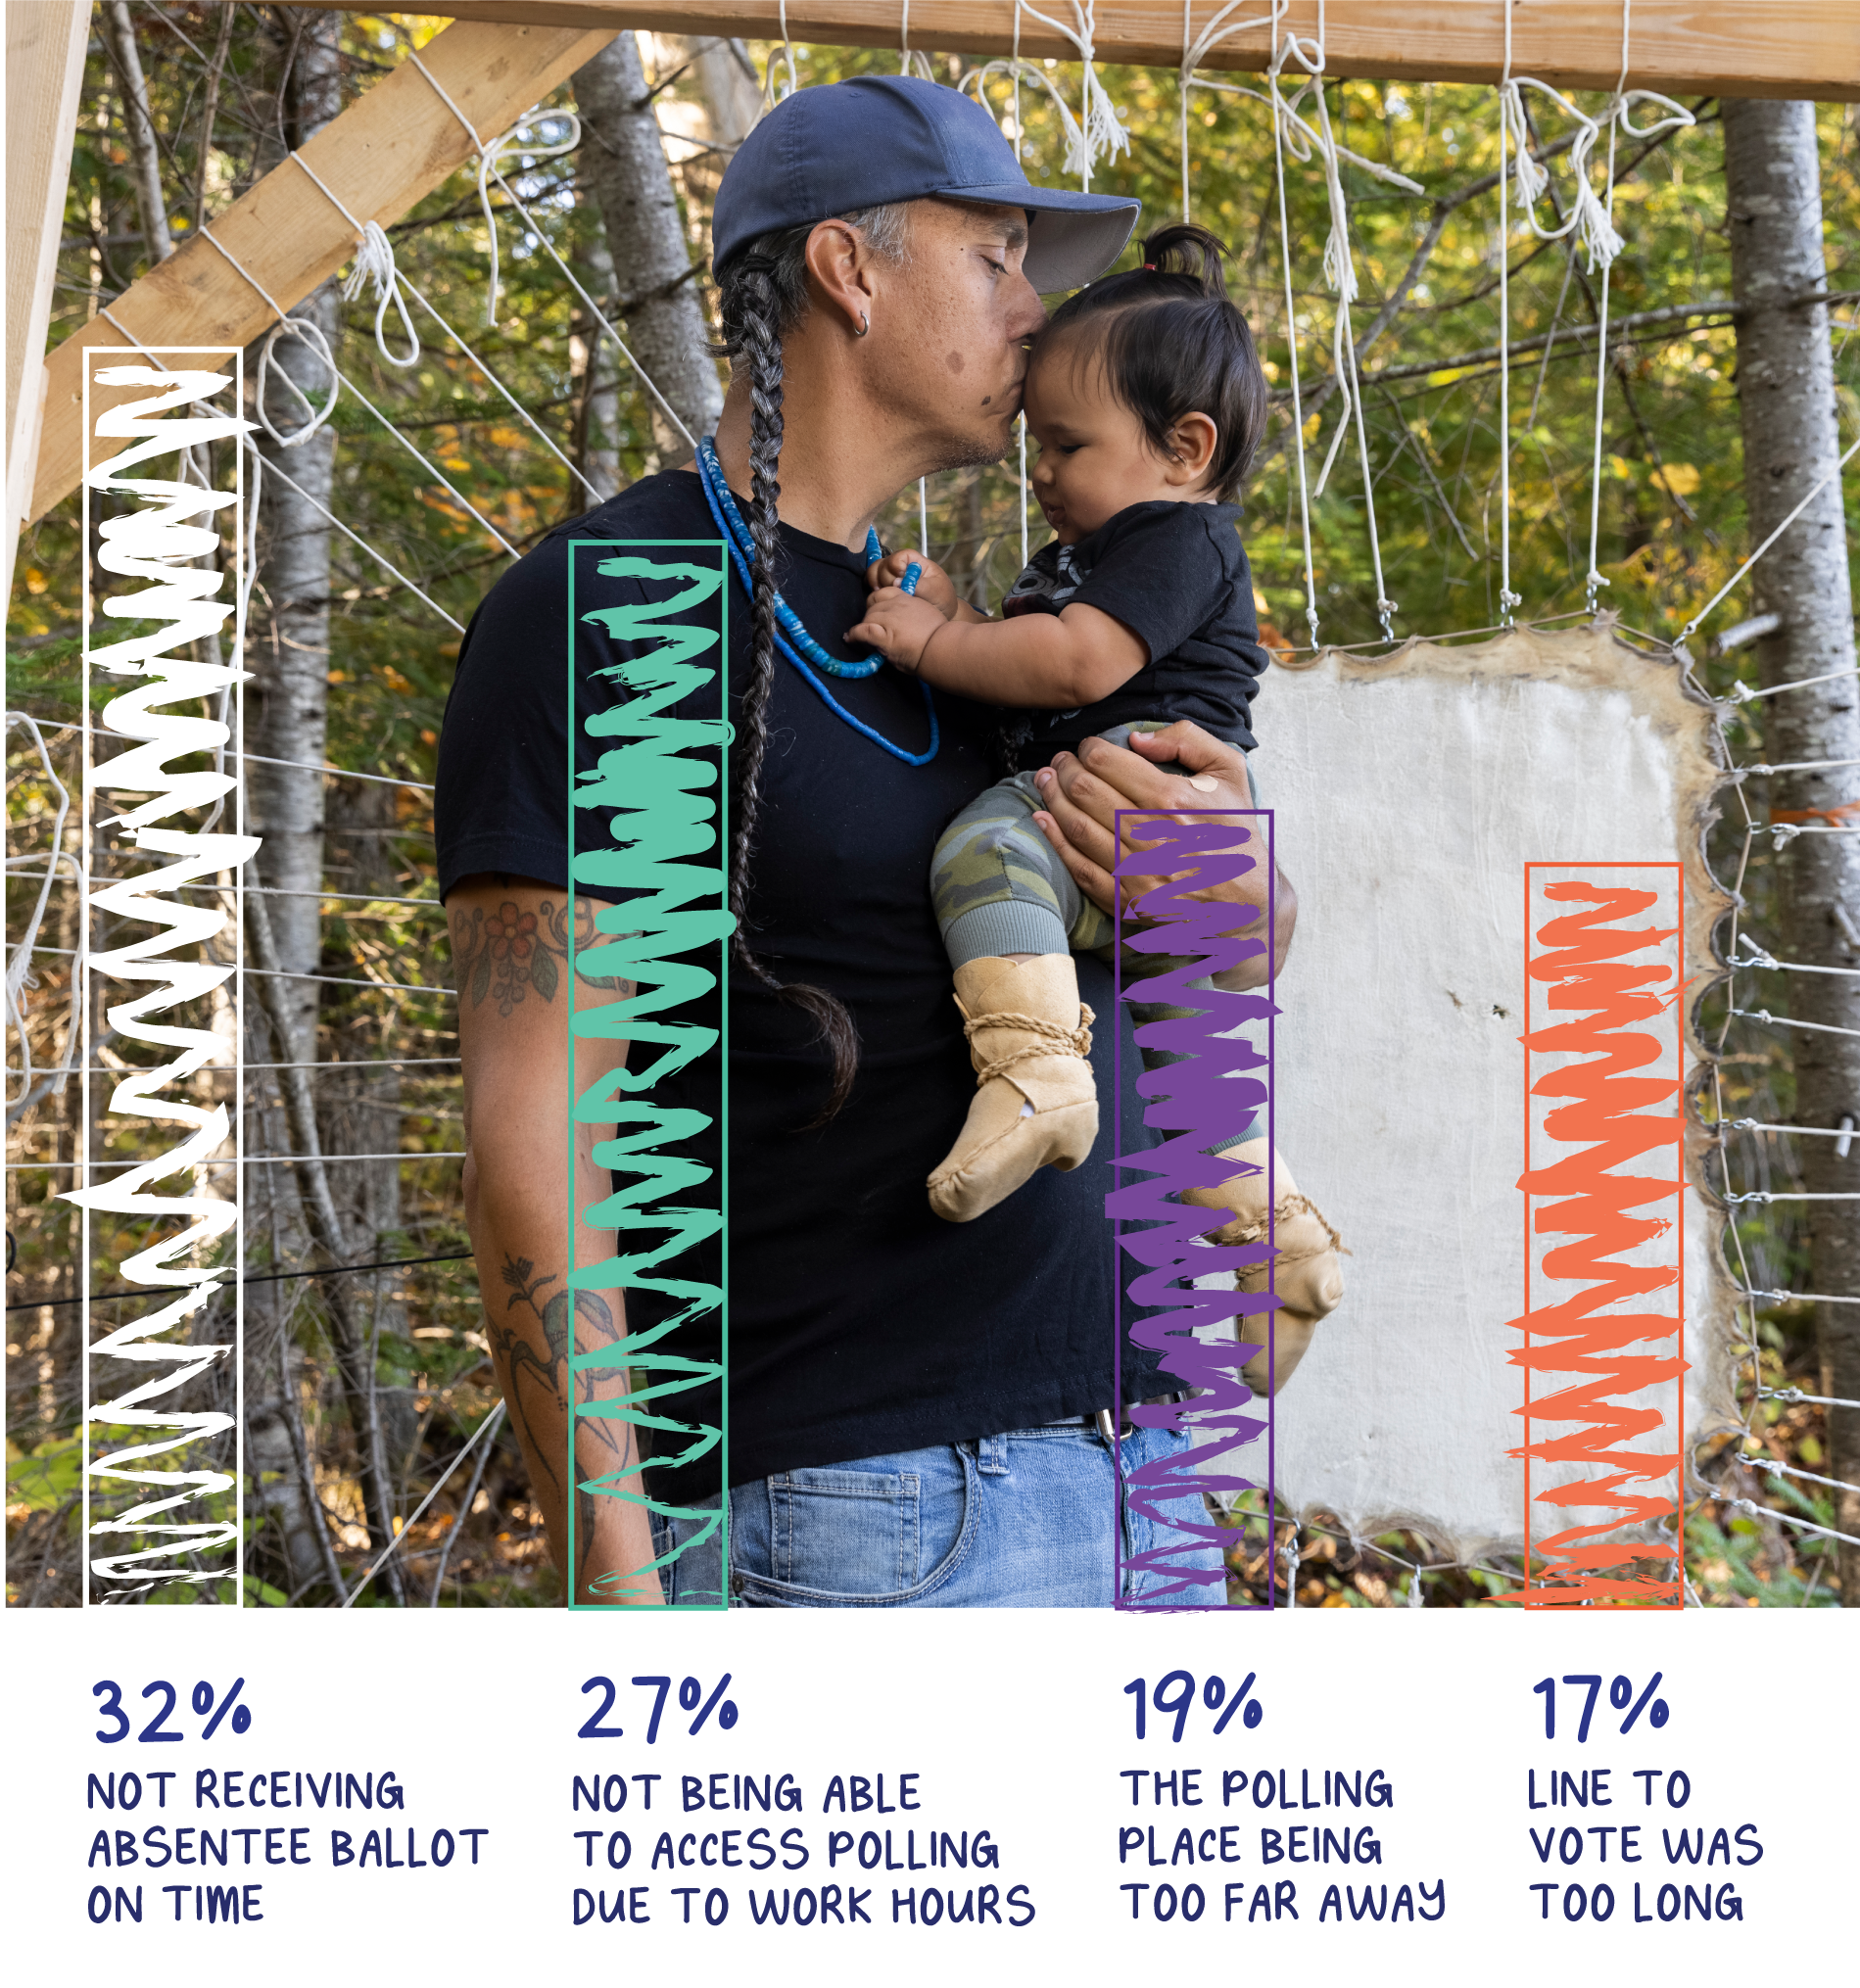 A picture of a Native man holding a baby. There is a bar chart on top of the picture depicting data to barriers of voting: 32% do not receive absentee ballot on time, 27% are not able to access polling due to work hours, 19% say the polling place is too far away, and 17% reported the line was too long at polling place.